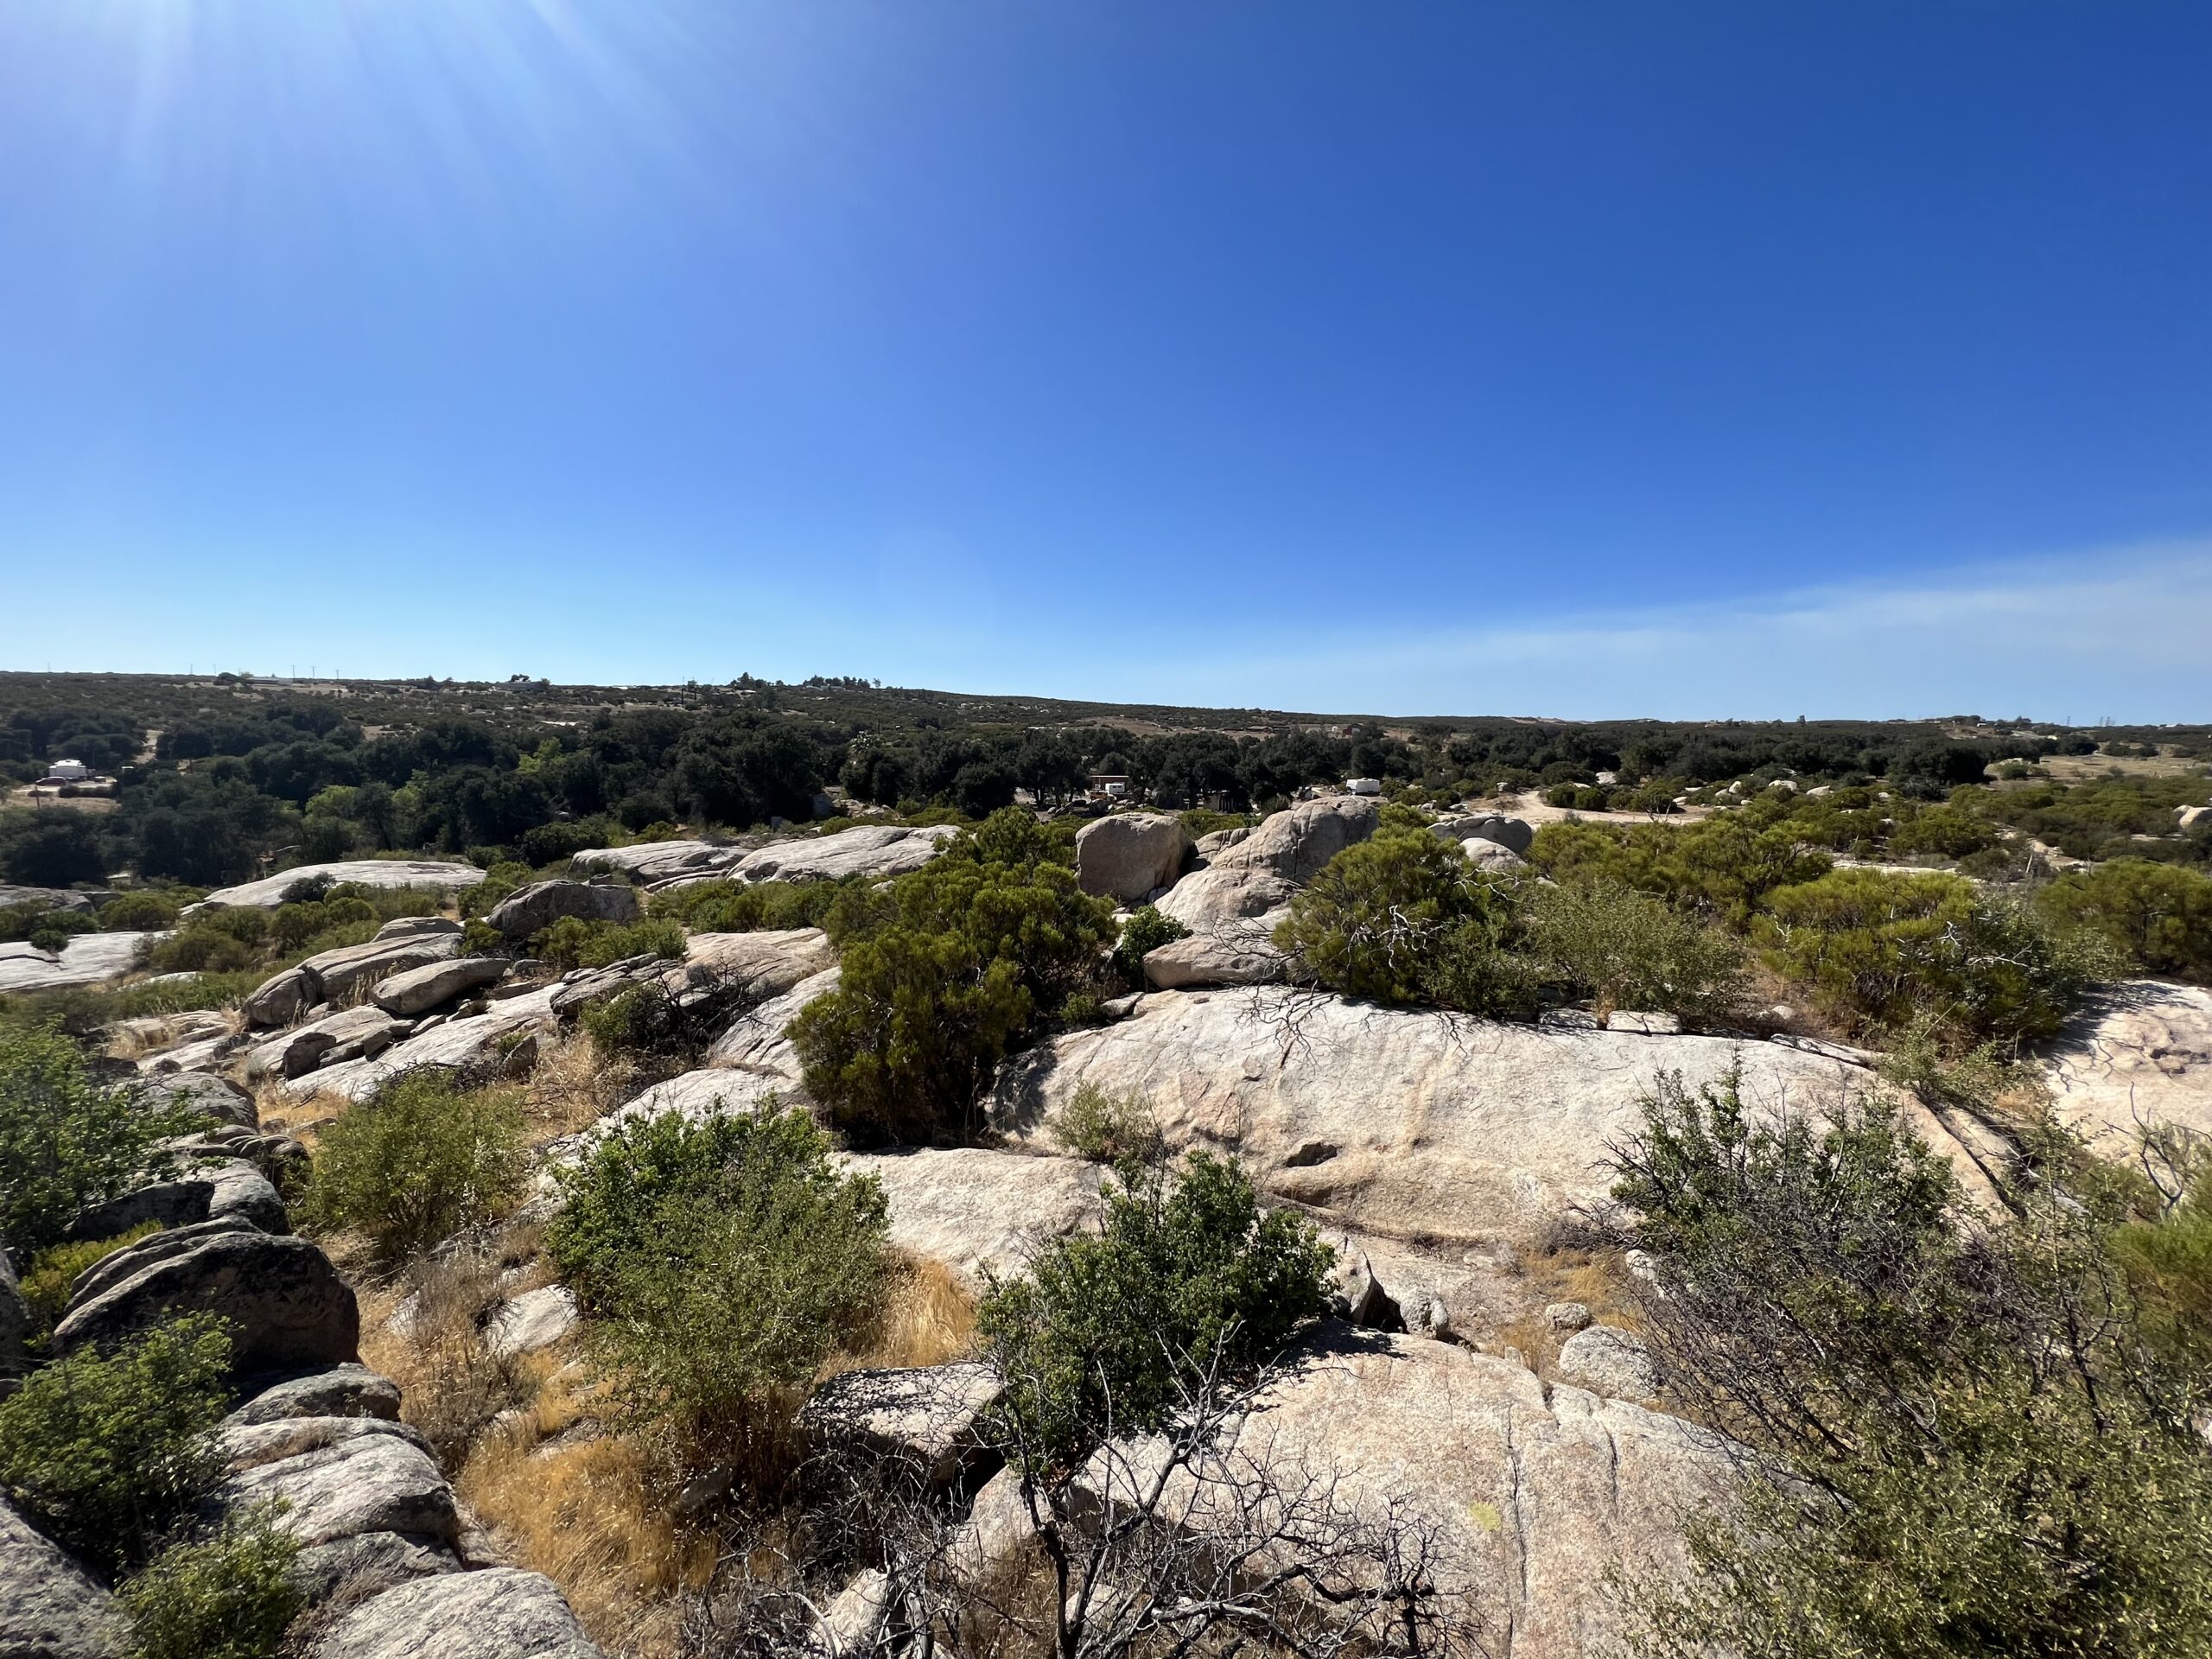 Rugged terrain under a clear blue sky: a serene landscape with HumanityOne's sunlit, rocky outcrops and scattered shrubs, embodying the tranquility of a natural, arid environment